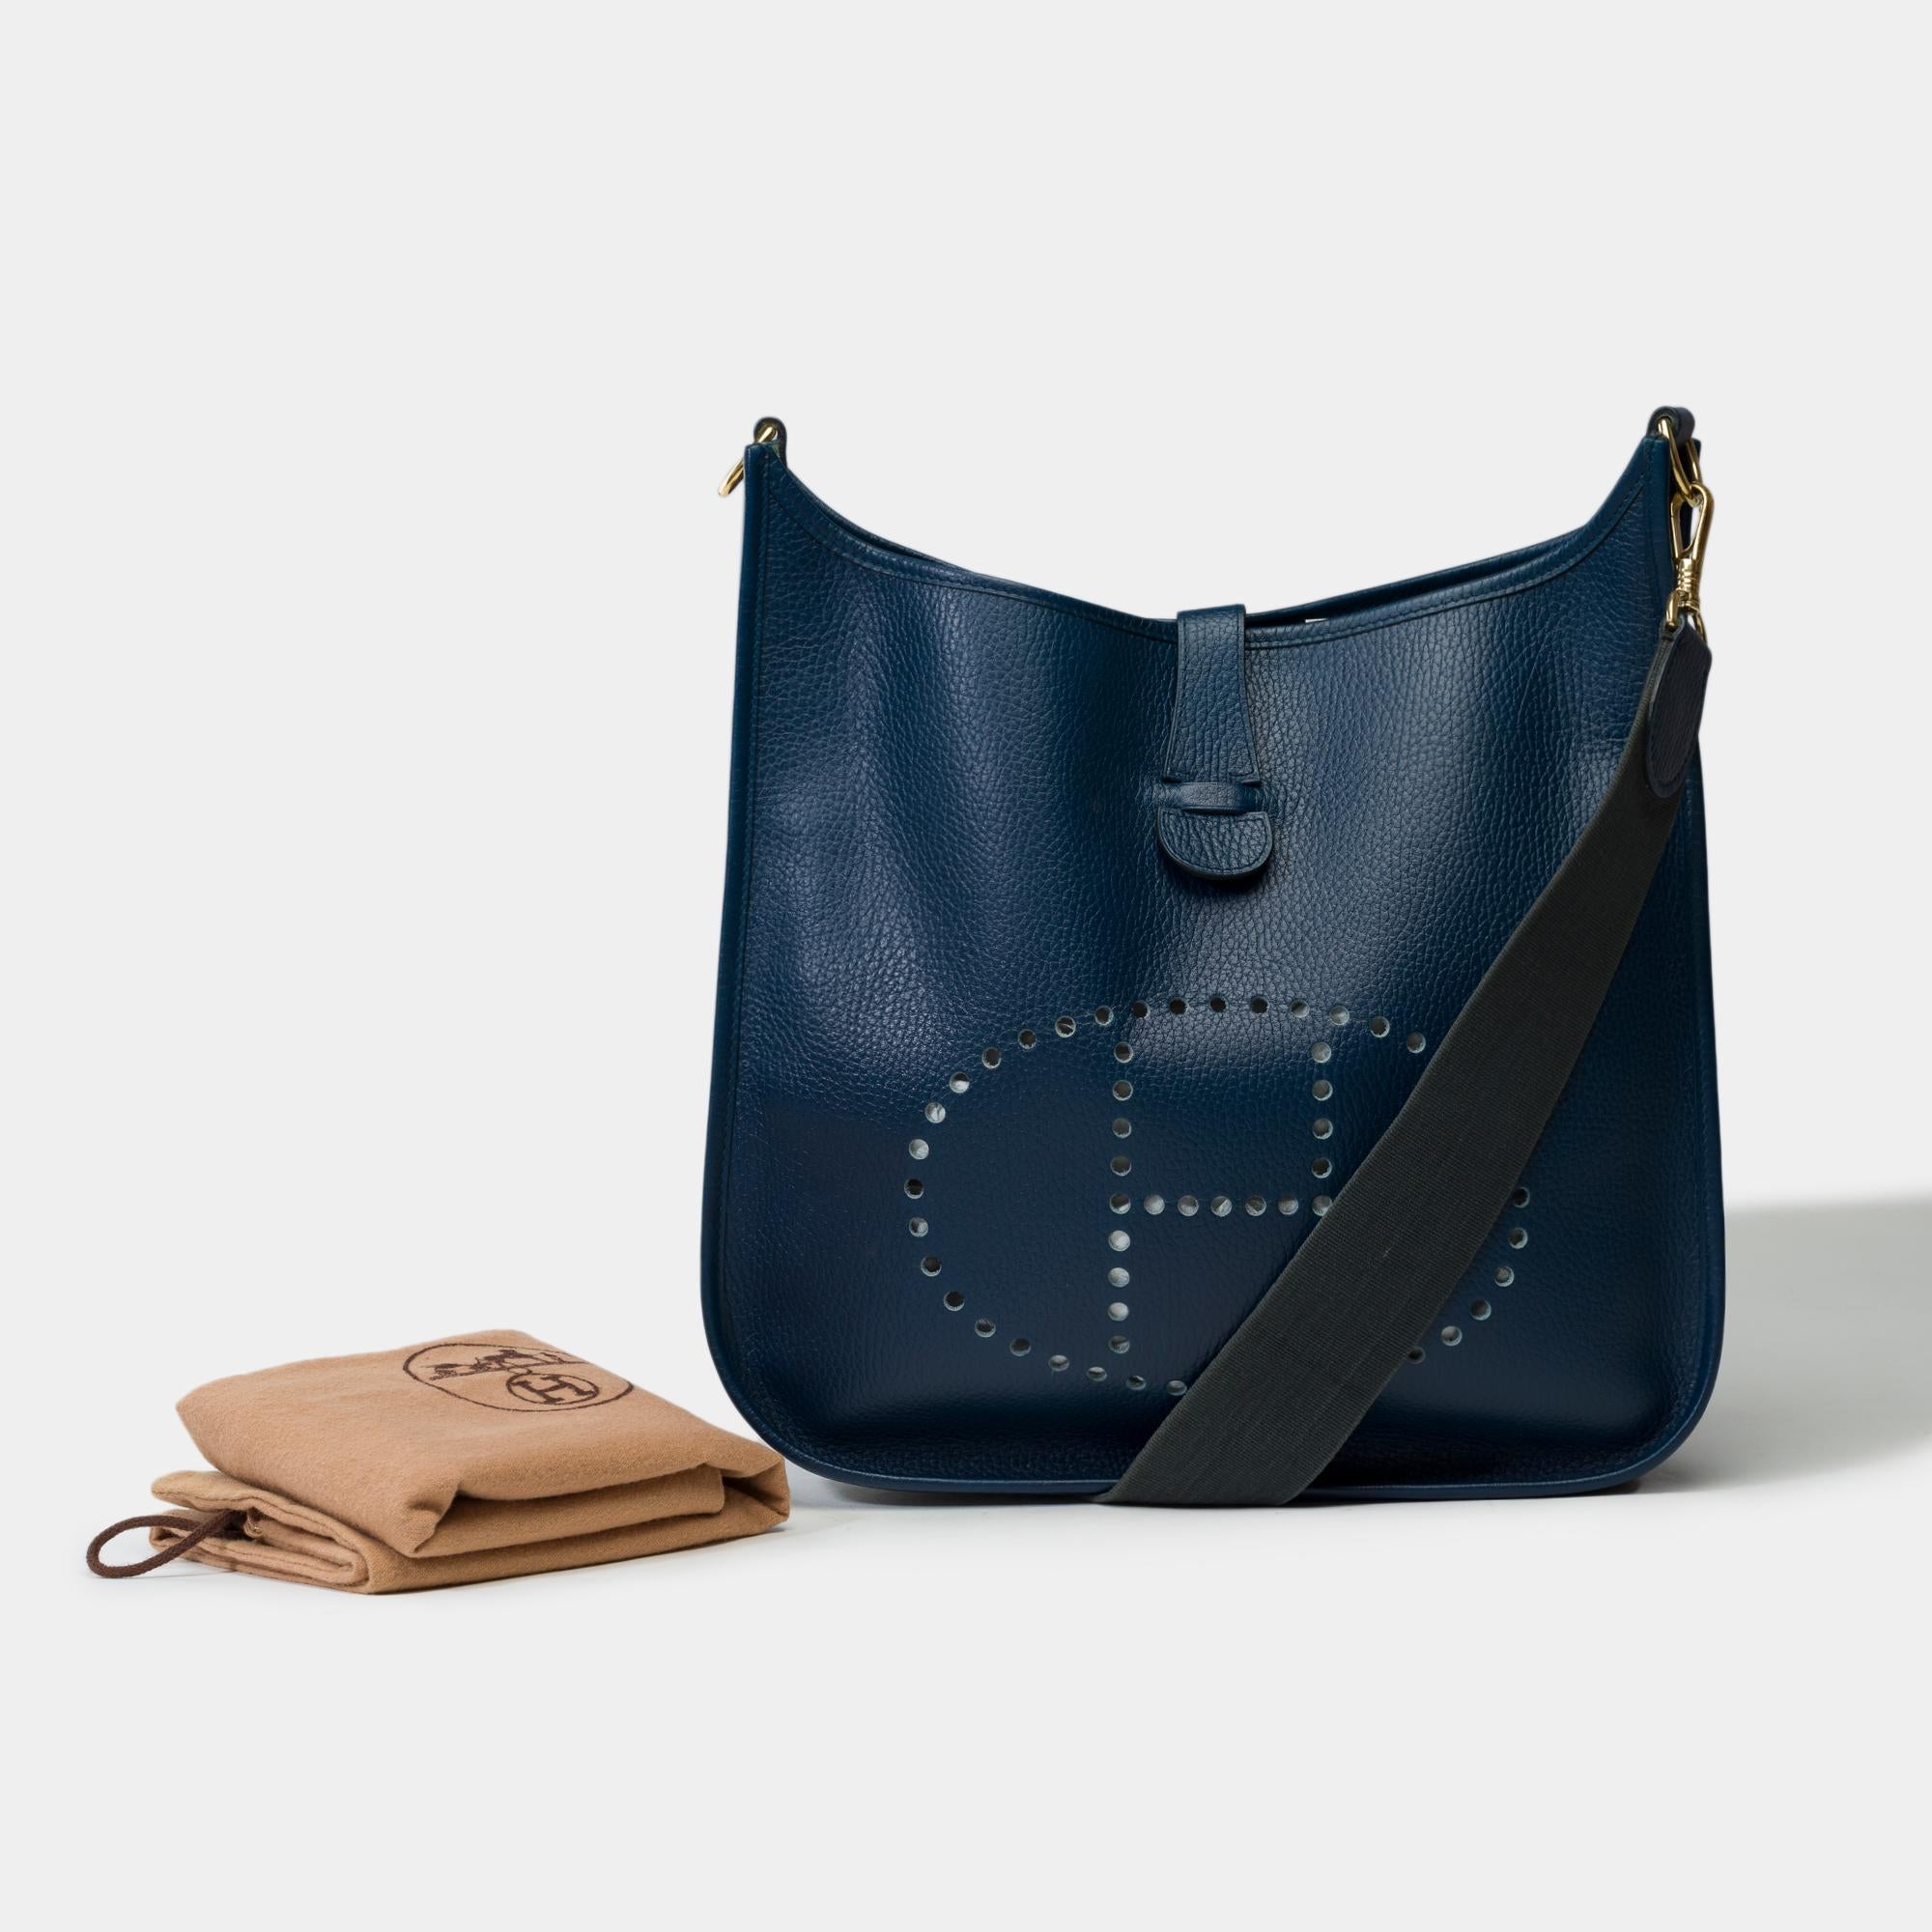 Iconic Hermès Evelyne GM shoulder bag in Navy blue Taurillon leather , gold metal trim, a removable shoulder strap in blue canvas allowing a shoulder or crossbody carry

Snap button closure on flap
Interior in blue suede
Signature: 